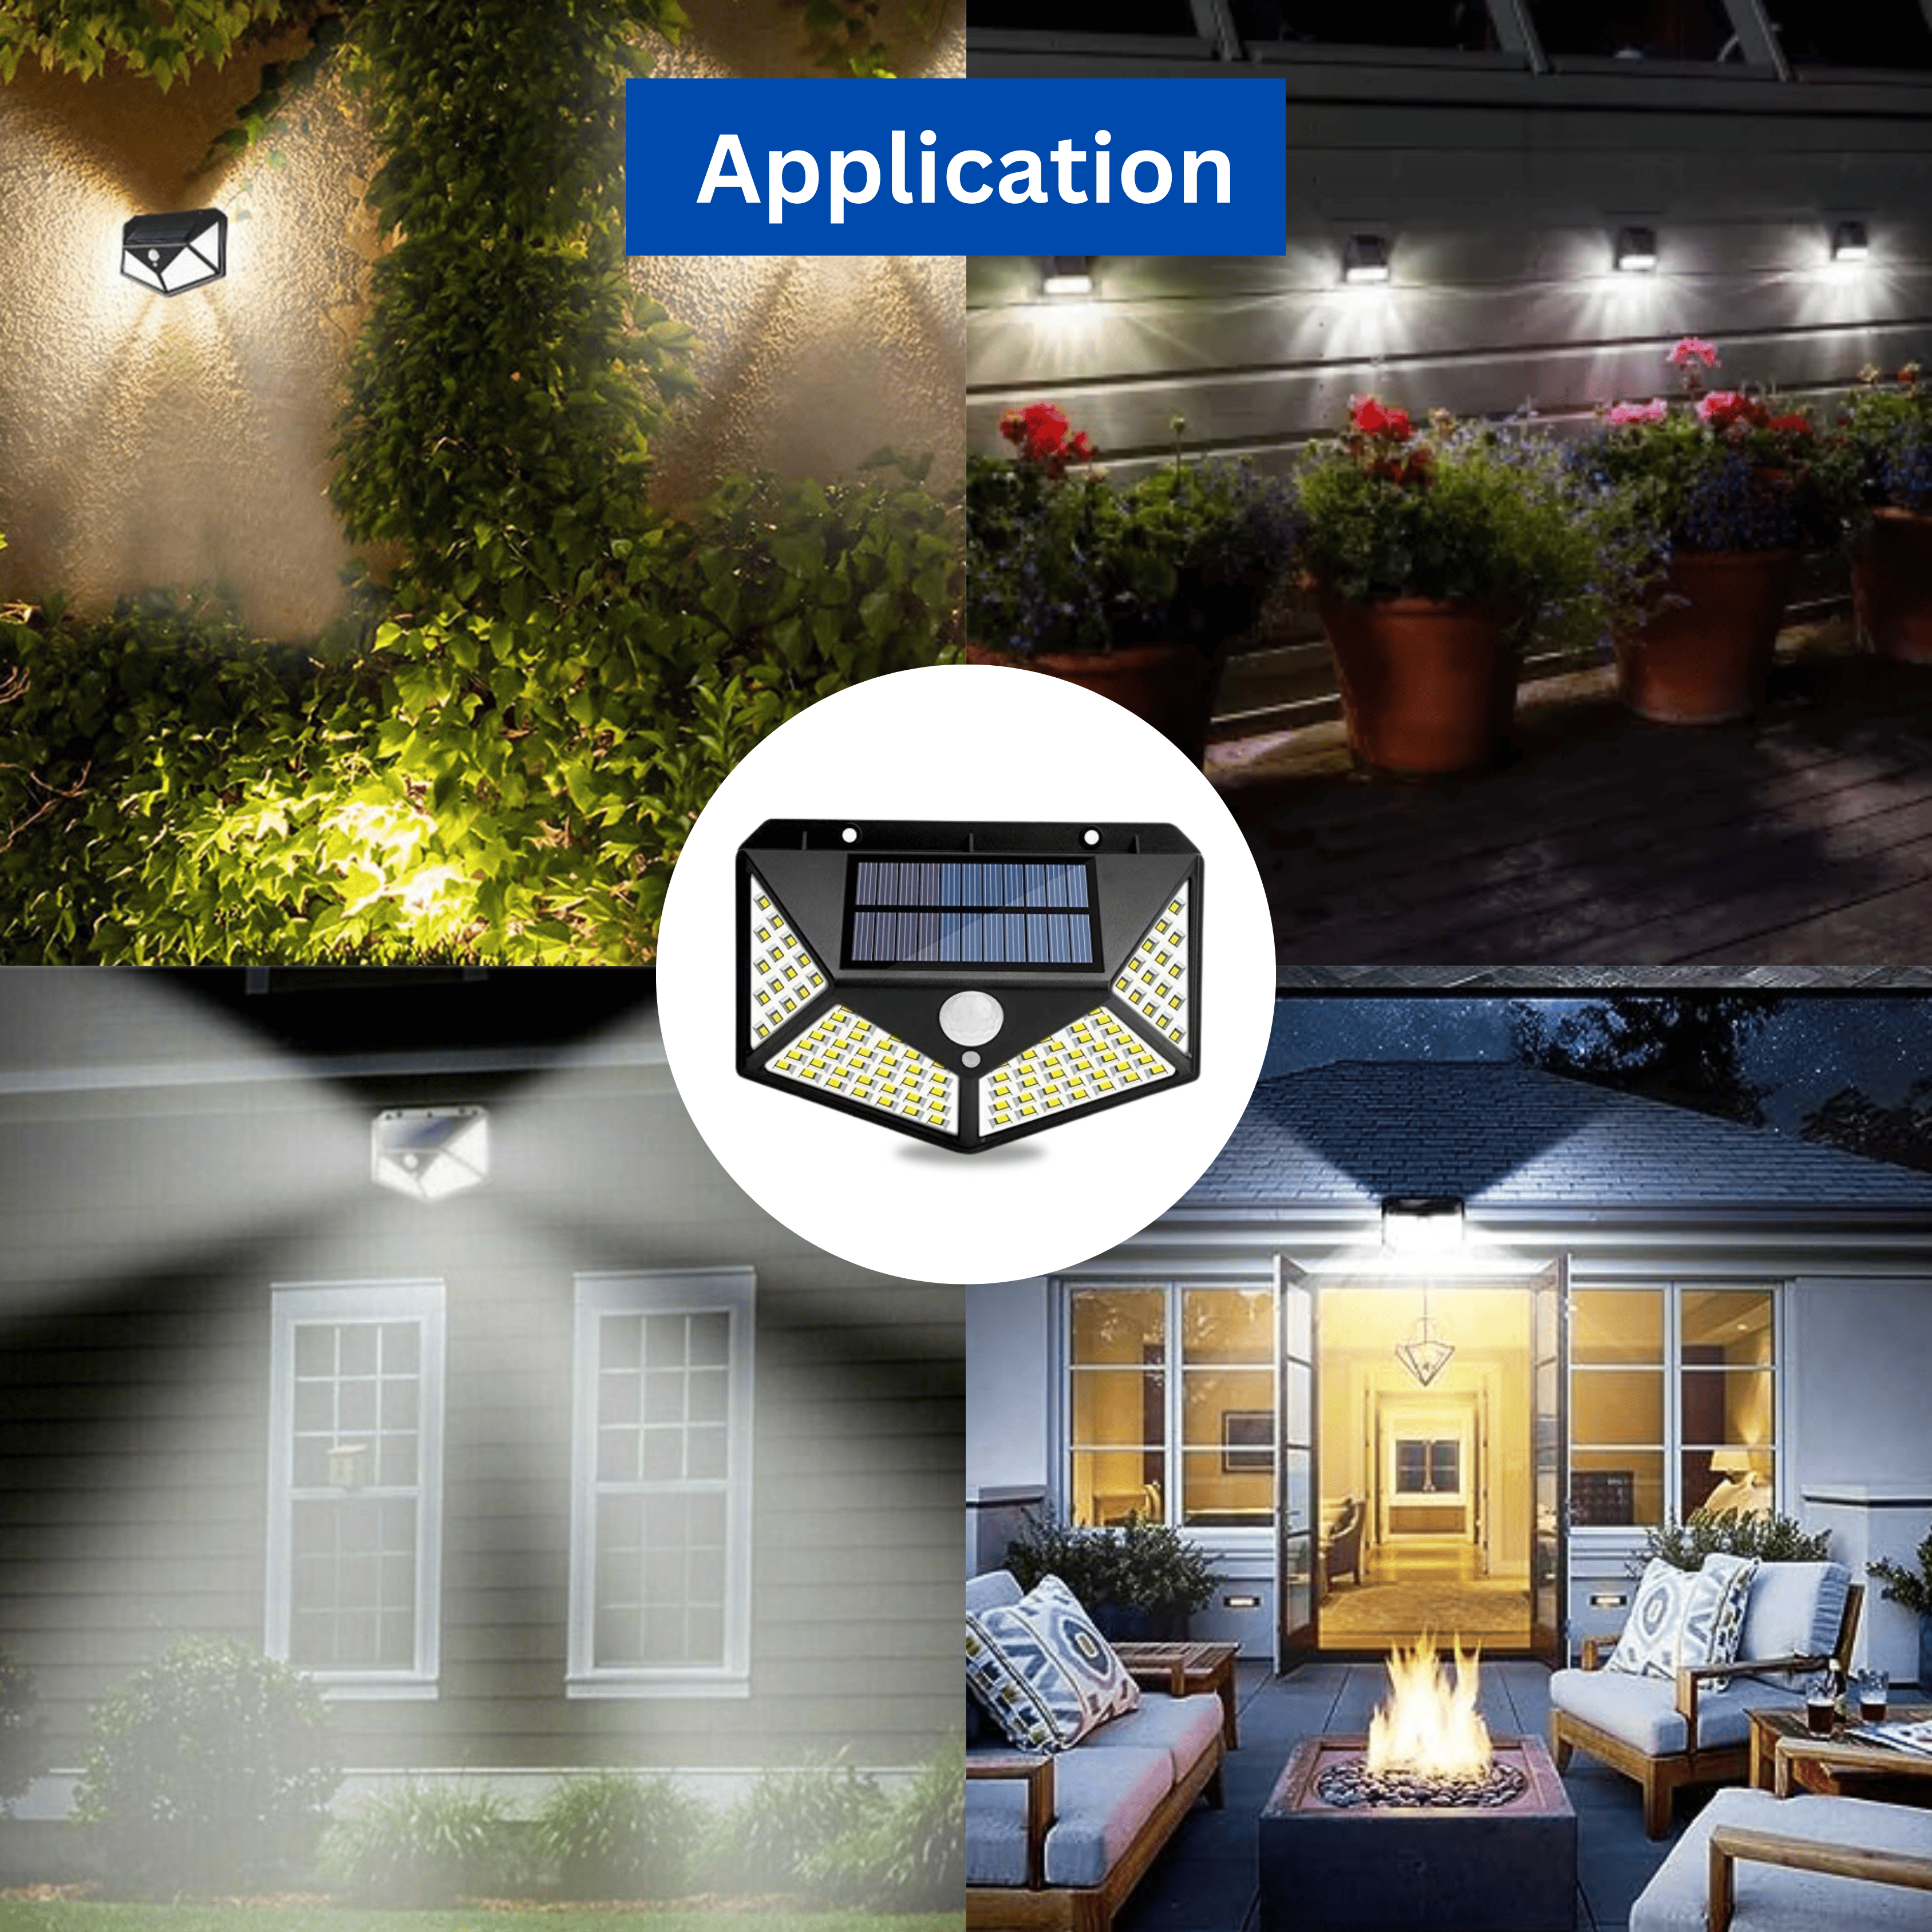 D'Mak Automatic Solar Motion 4 Way Wall Light for Outdoor Purposes